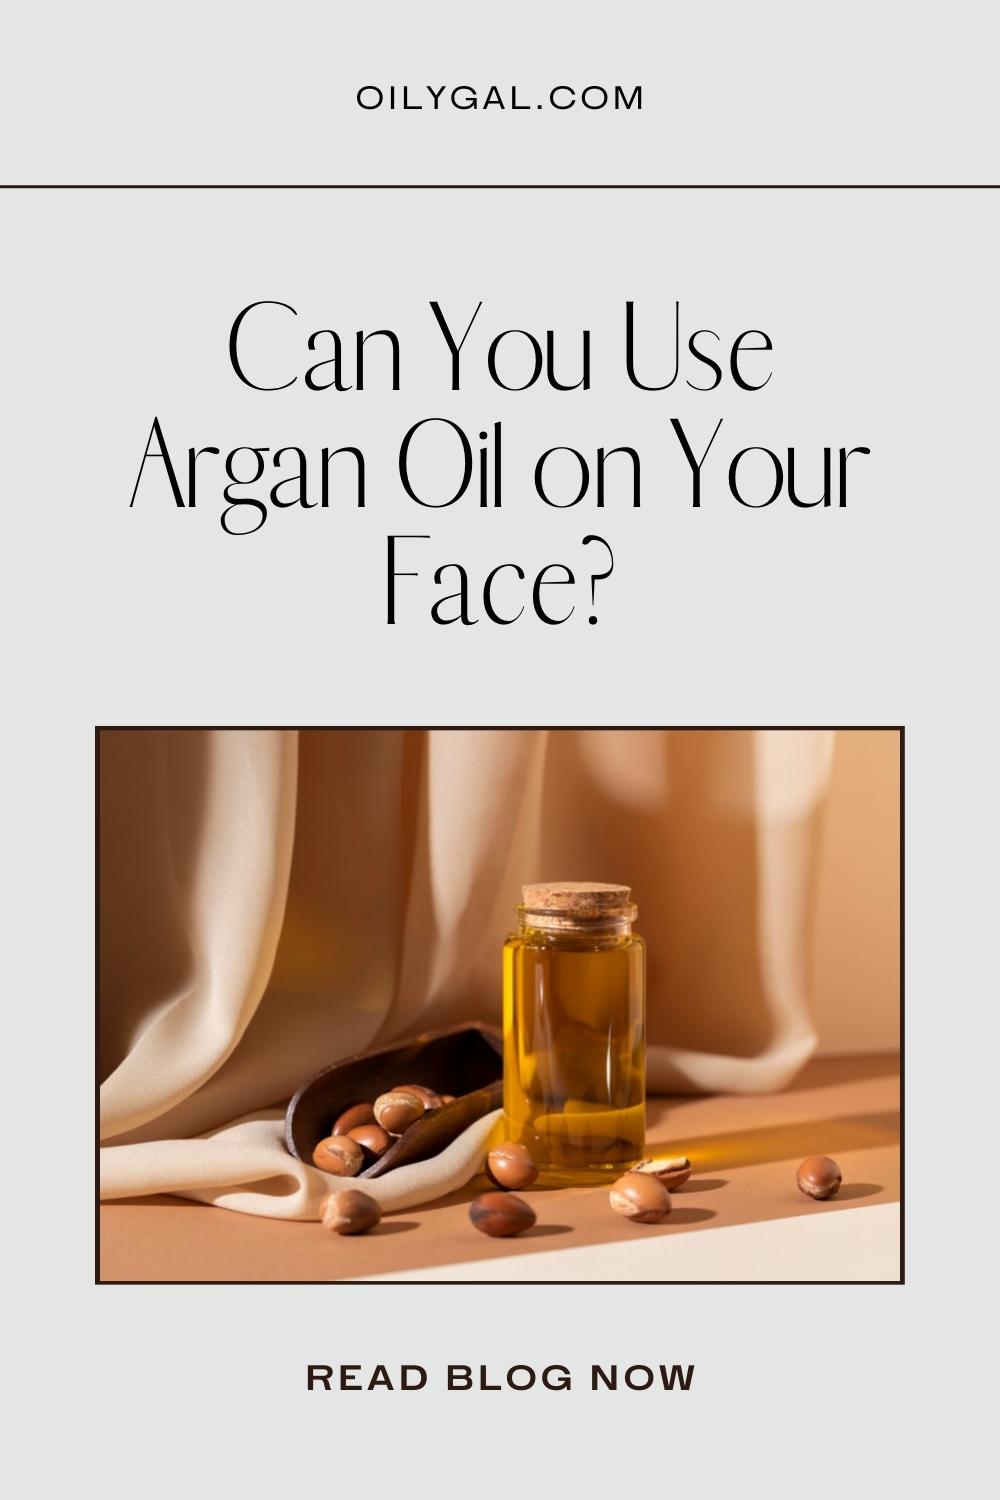 Can You Use Argan Oil on Your Face